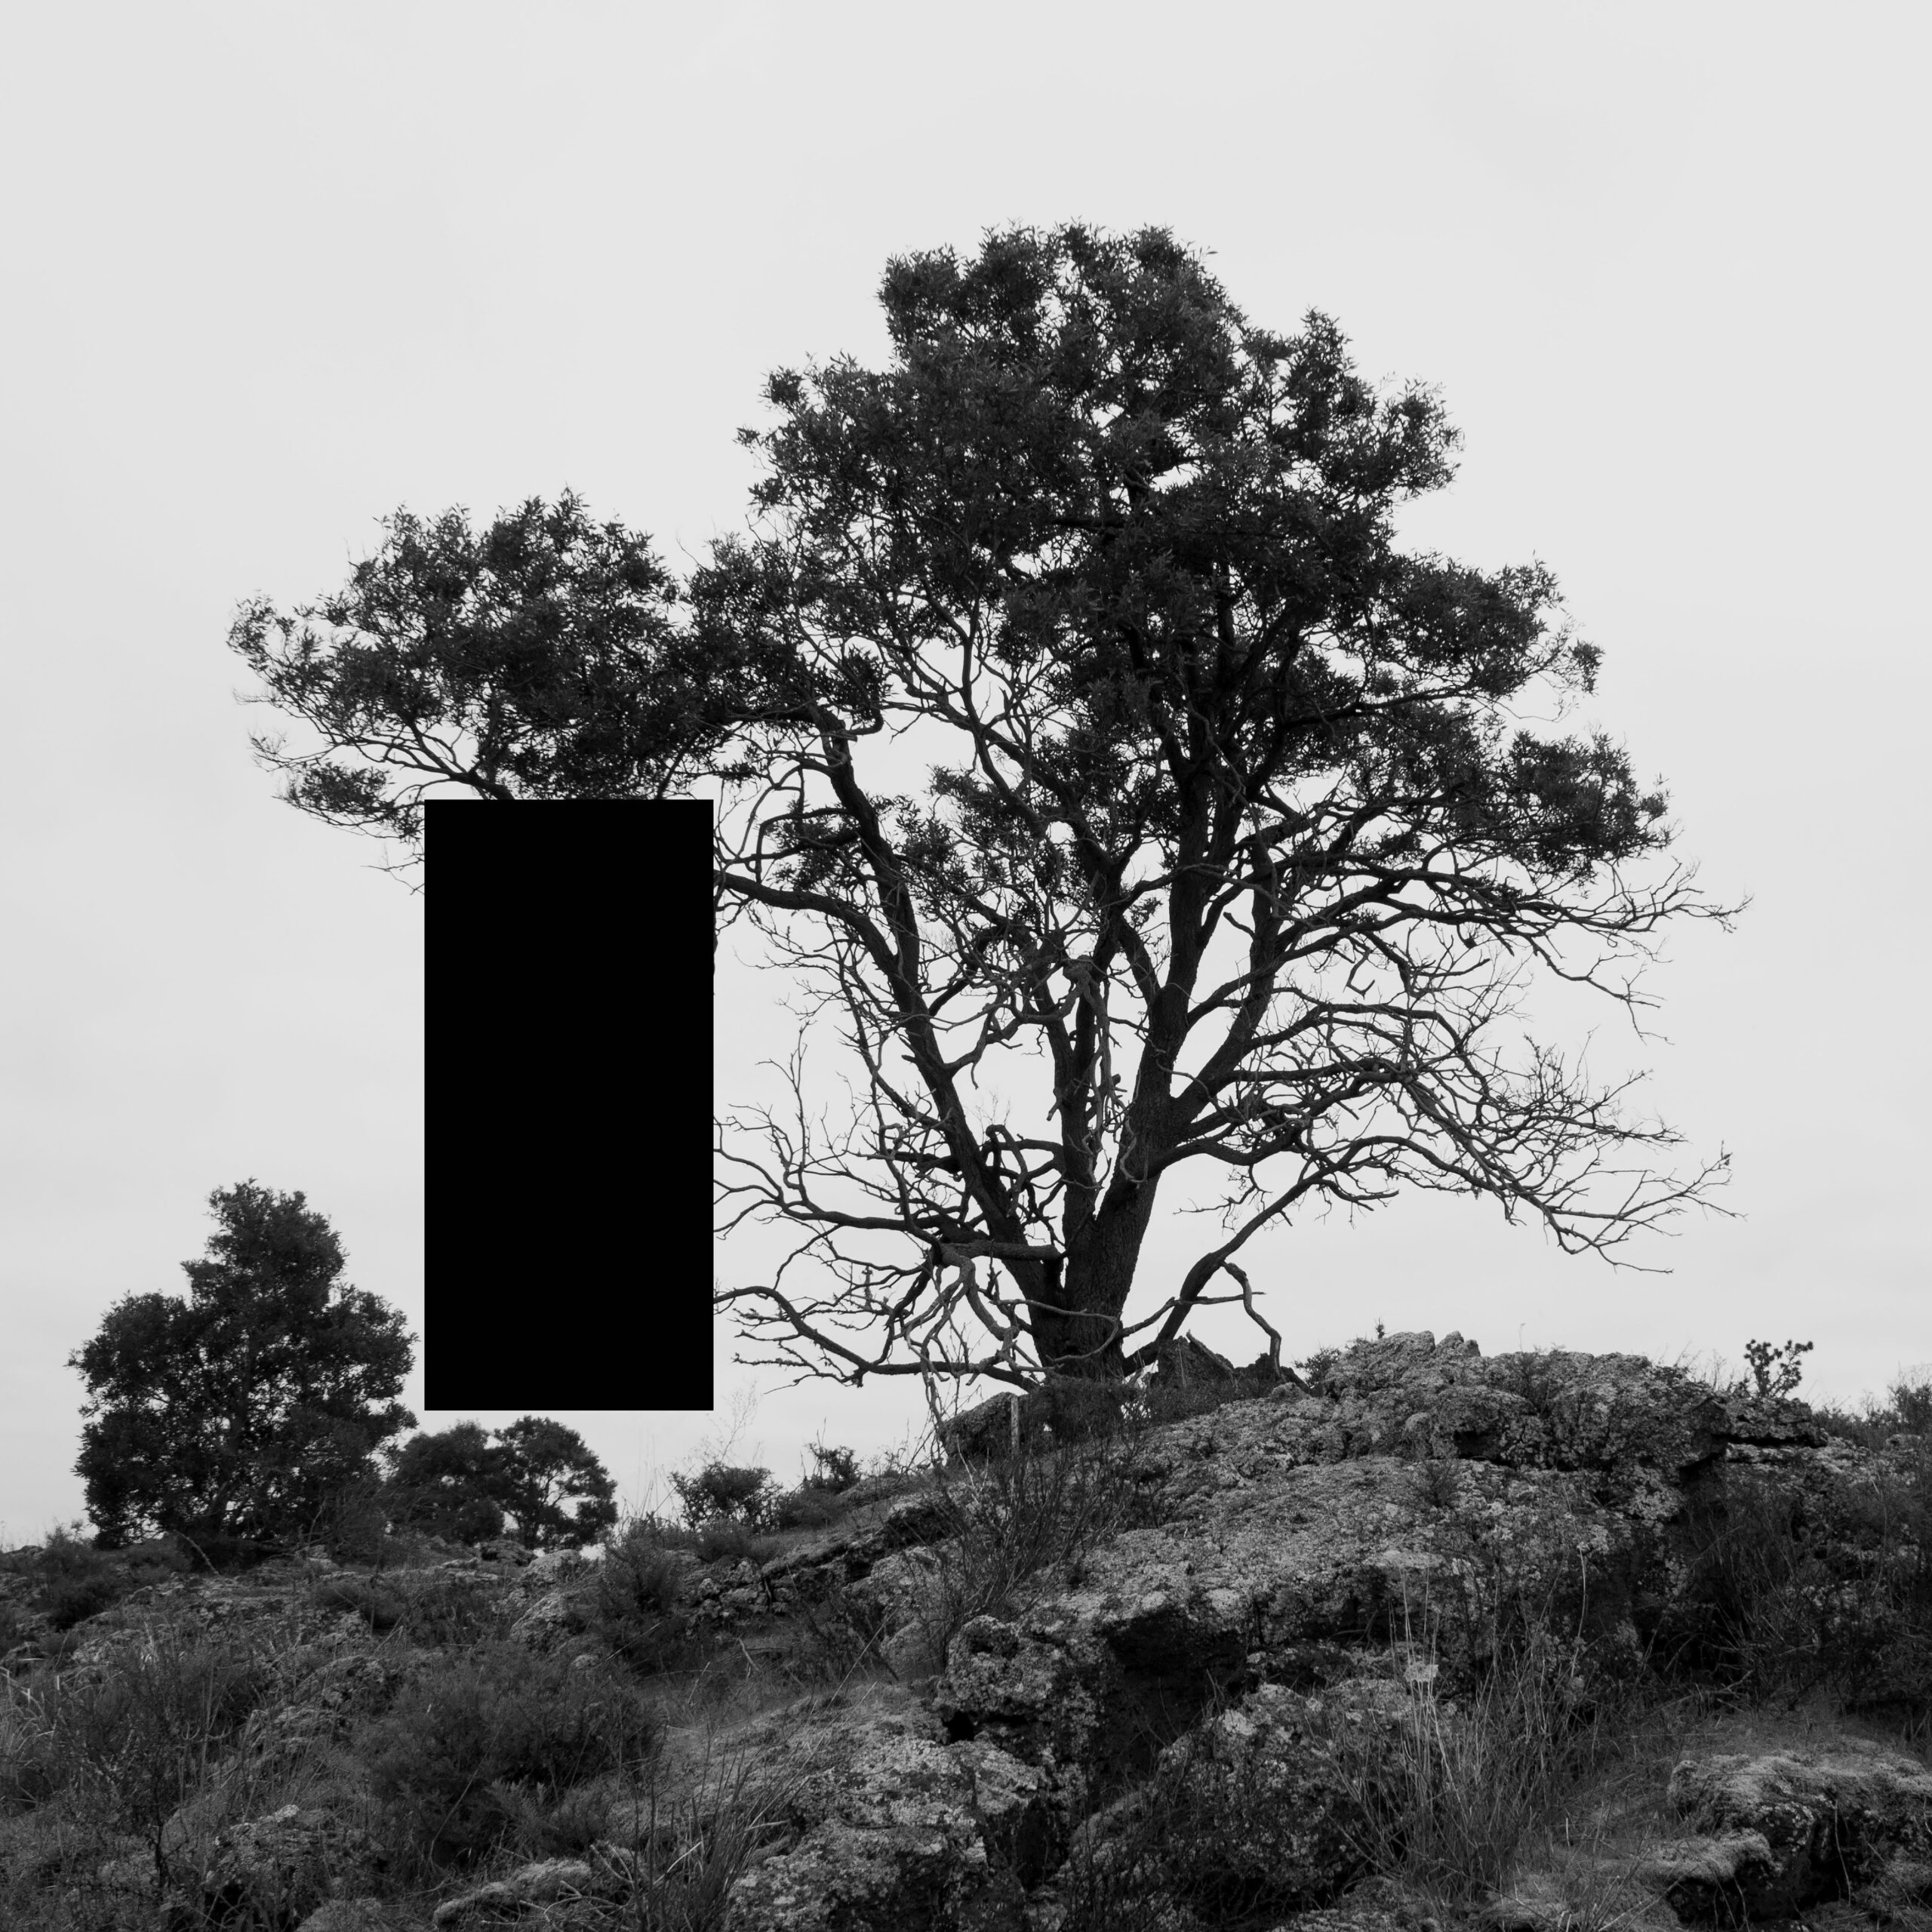 Removed Scenes From an Untouched Landscape 4, Inkjet print on hahnemuhle paper with hole removed to a black velvet void, 50x50cm